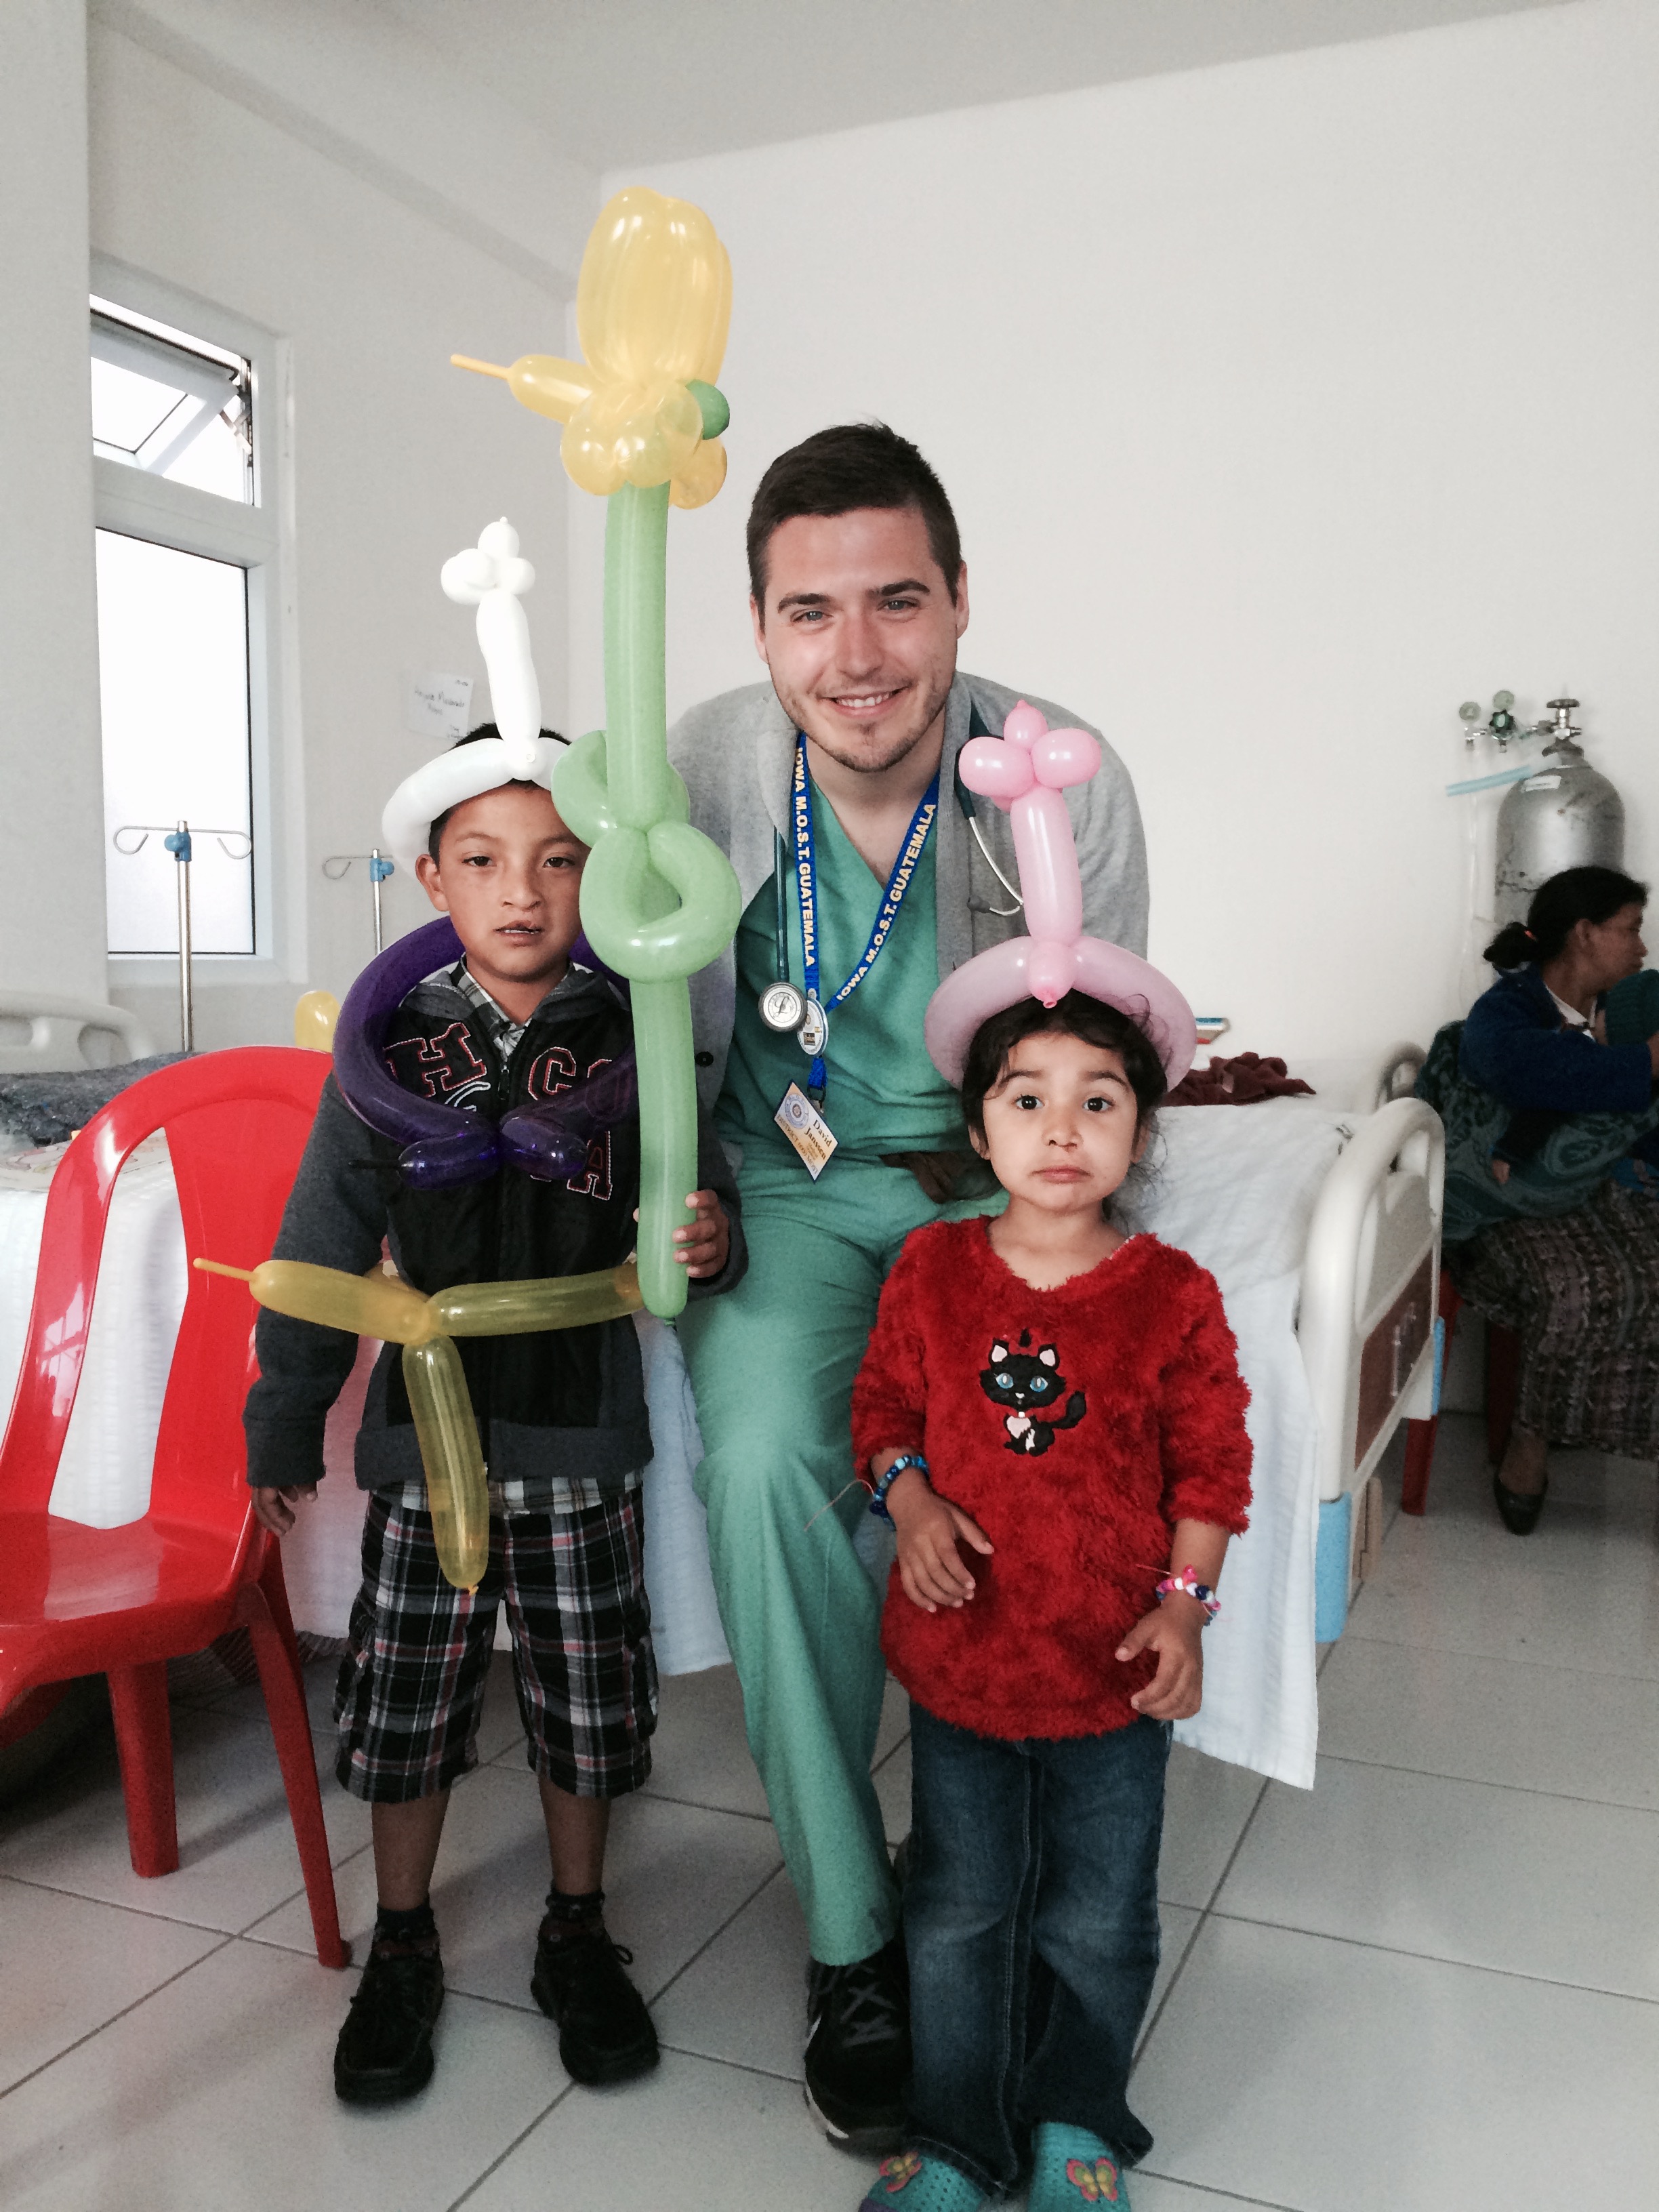 Med student David shows off his other talent - balloon animals!